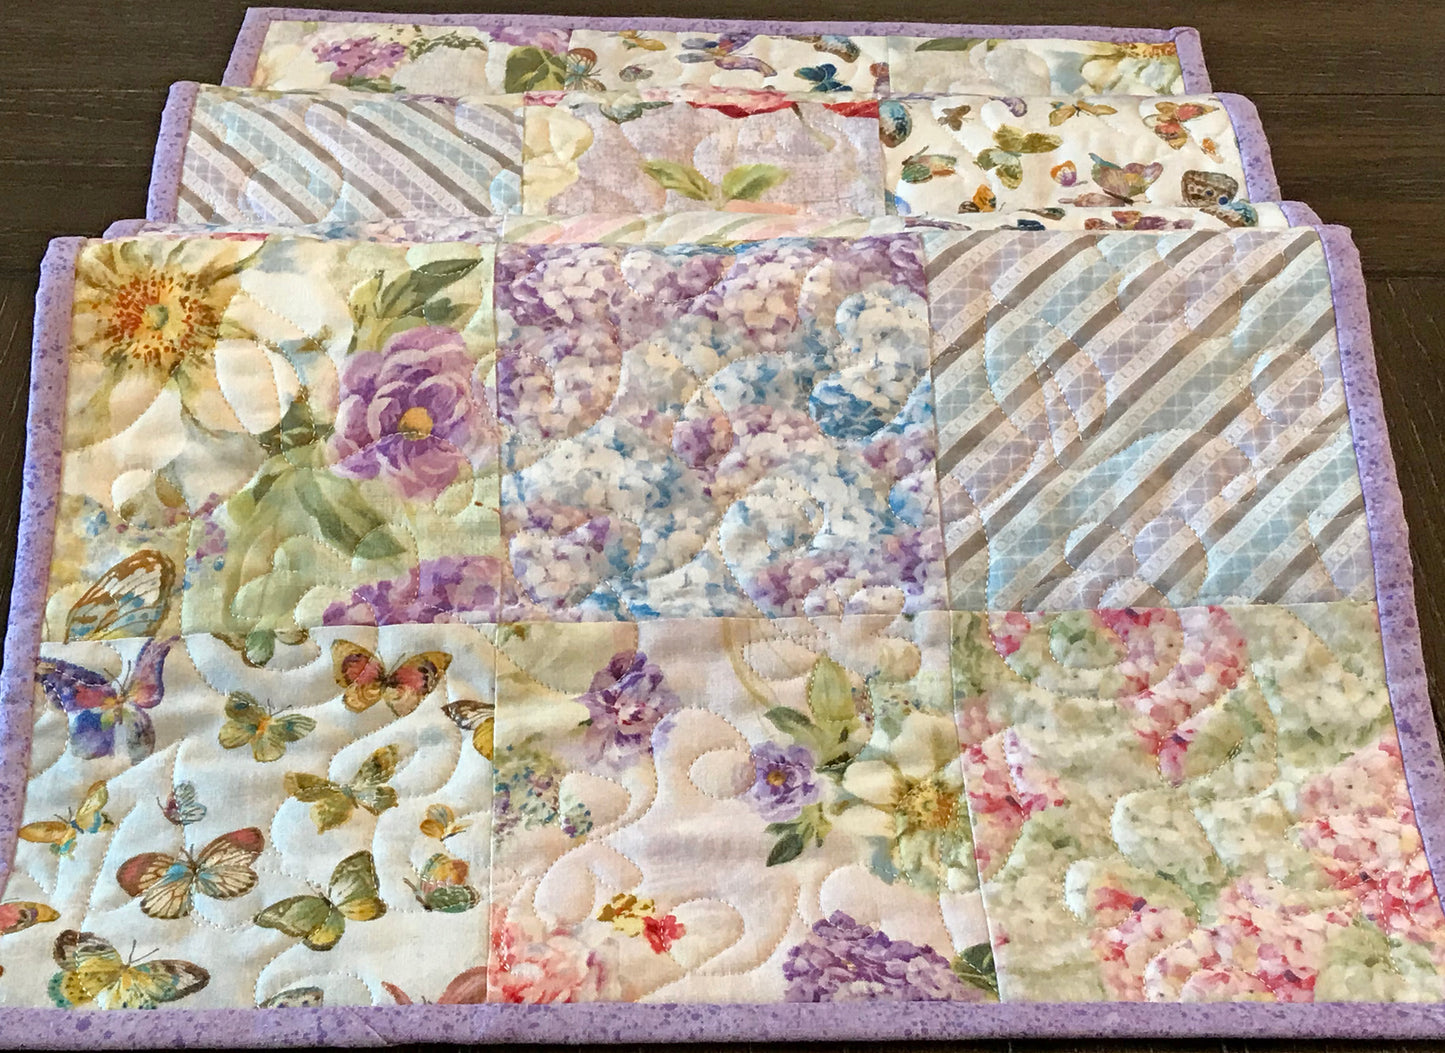 Butterfly Floral Patchwork Table Runner - Handmade Quilts, Digital Patterns, and Home Décor items online - Cuddle Cat Quiltworks